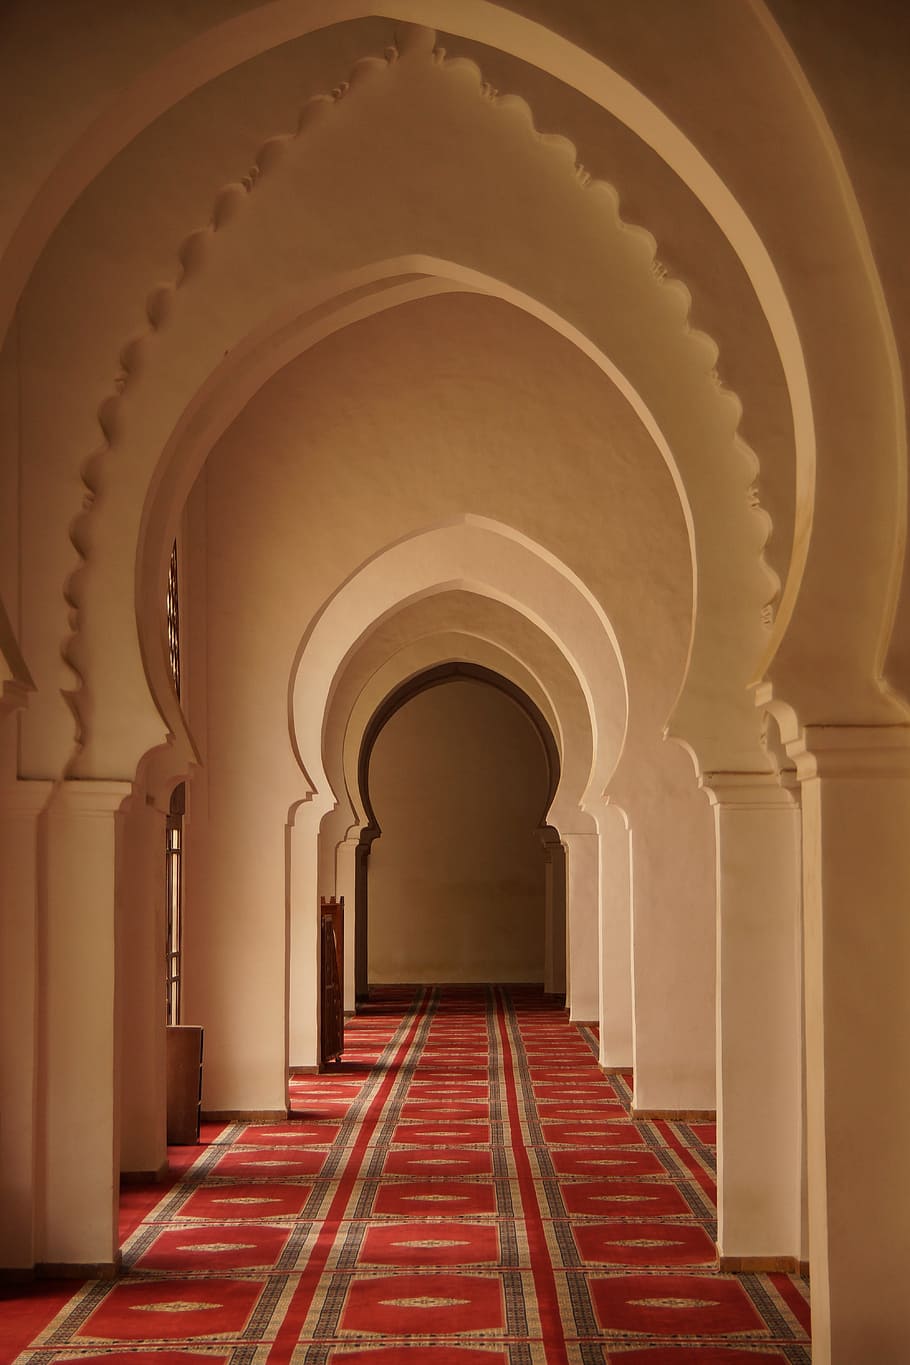 Mosque, Arc, Arabic, Style, red, architecture, architecture And Buildings